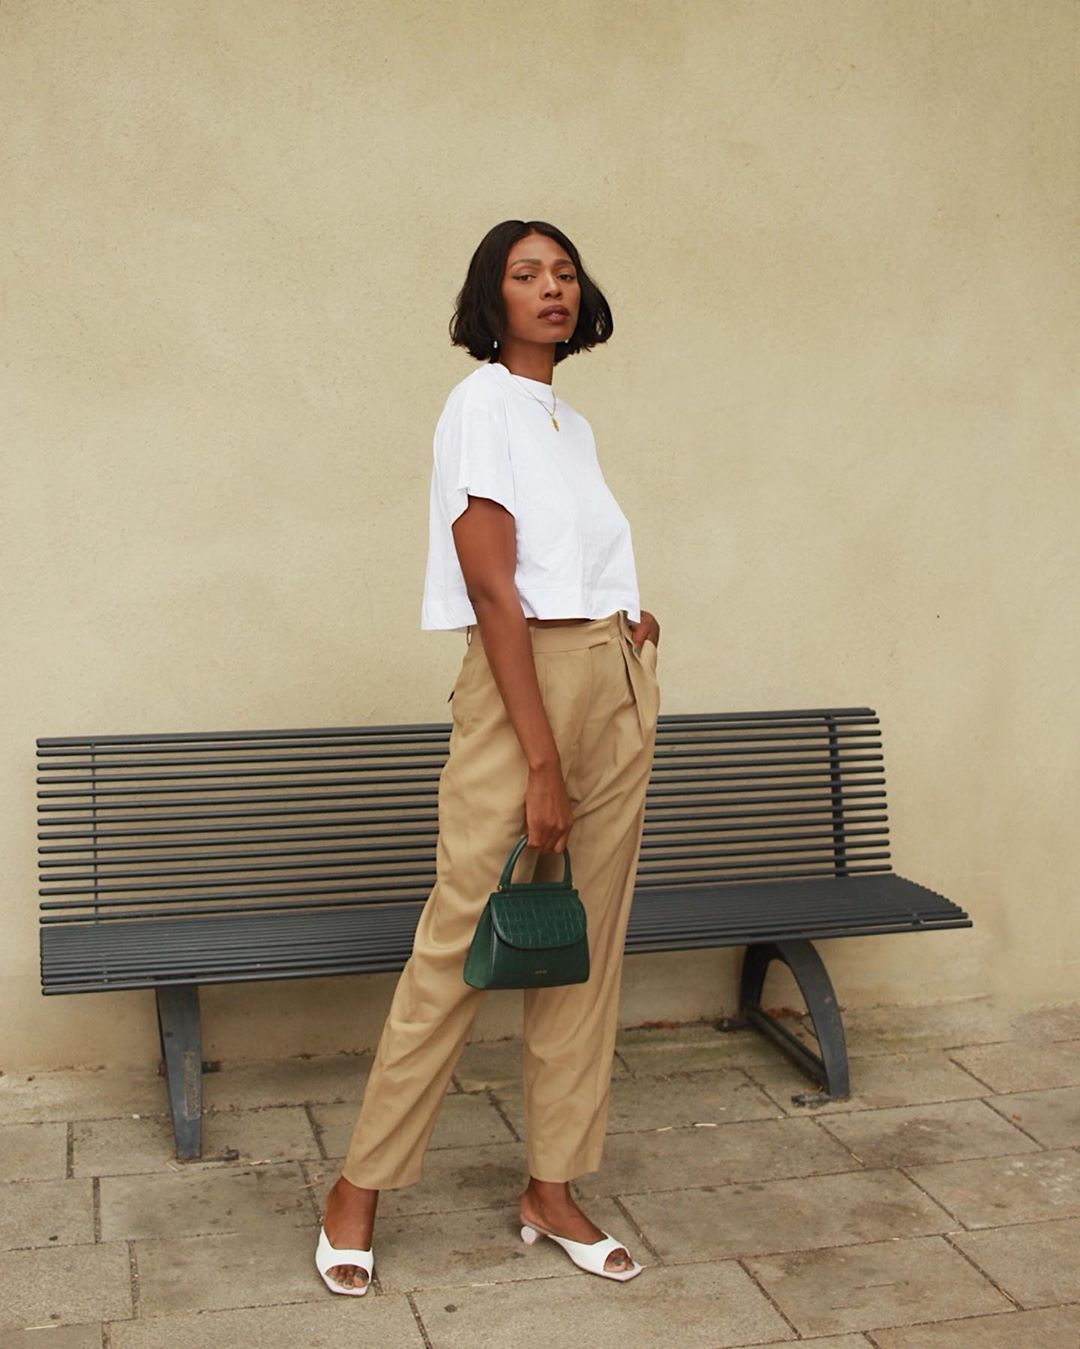 Le Fashion: This French Girl's Minimalist Outfit is So Chic